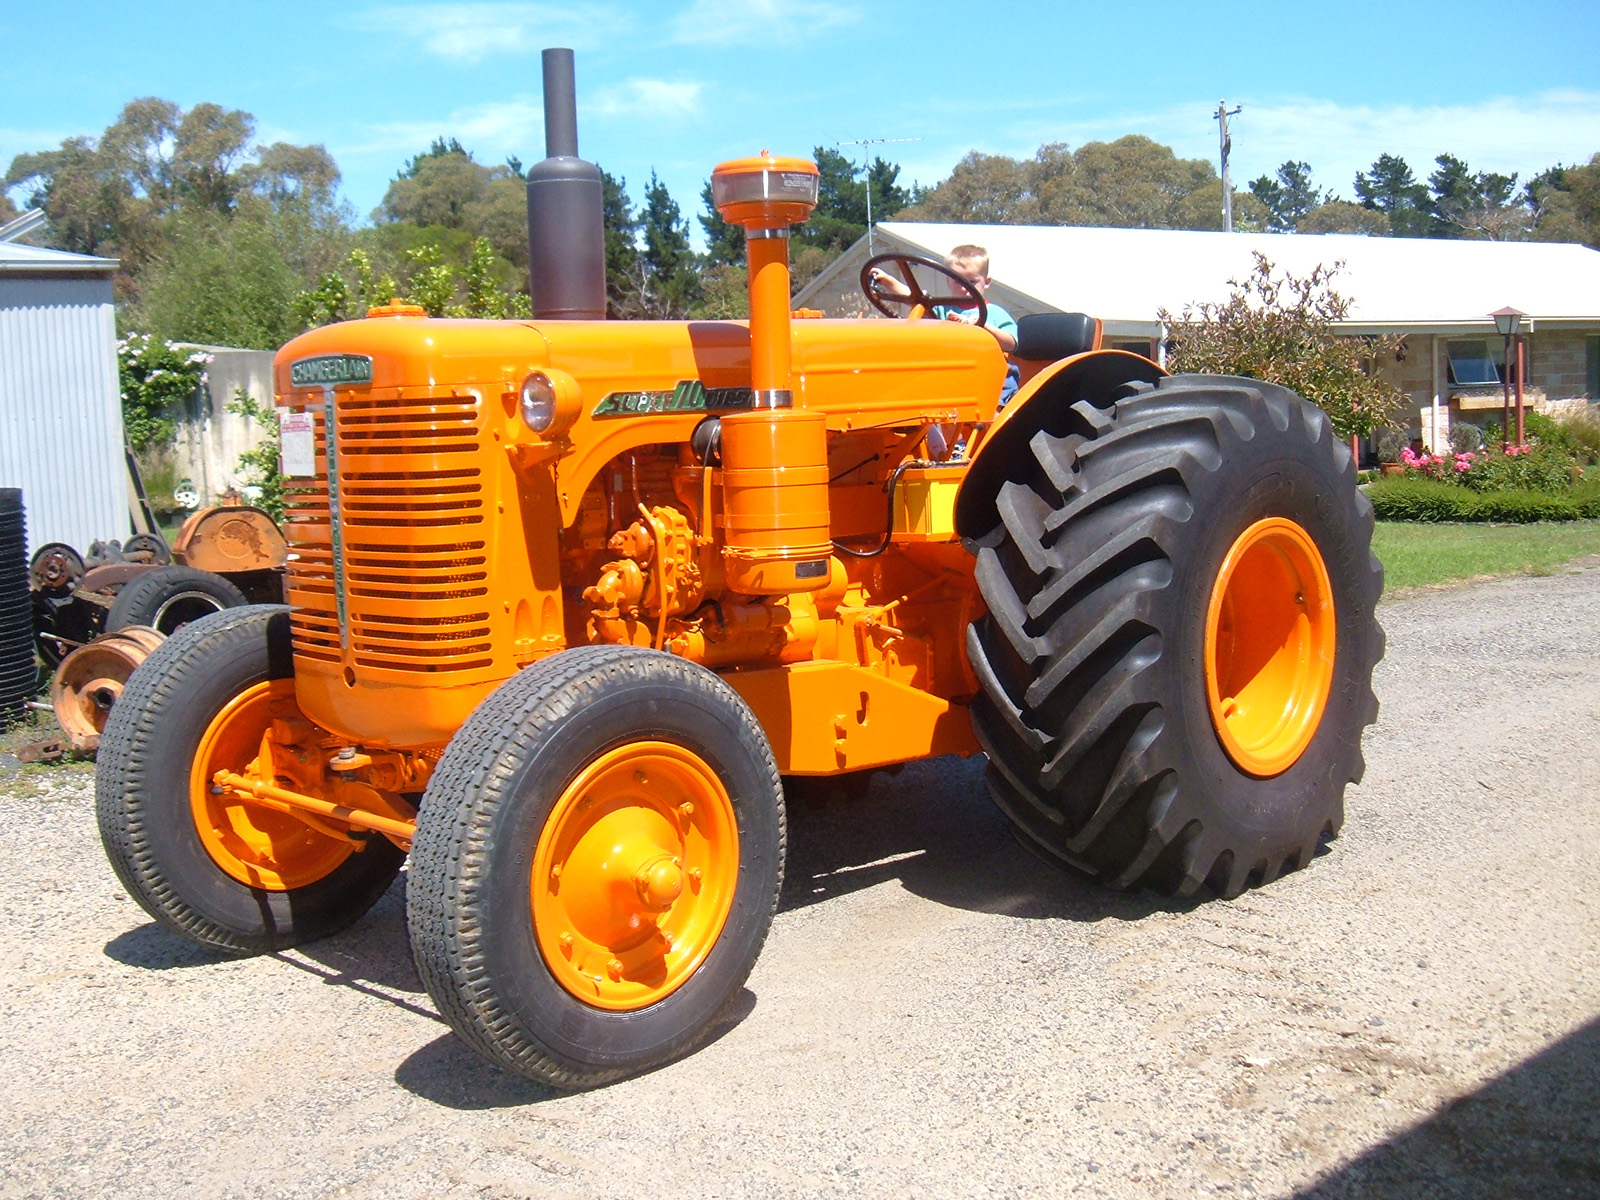 chamberlain super 70 1962 fully and meticulously restored new tyres ...